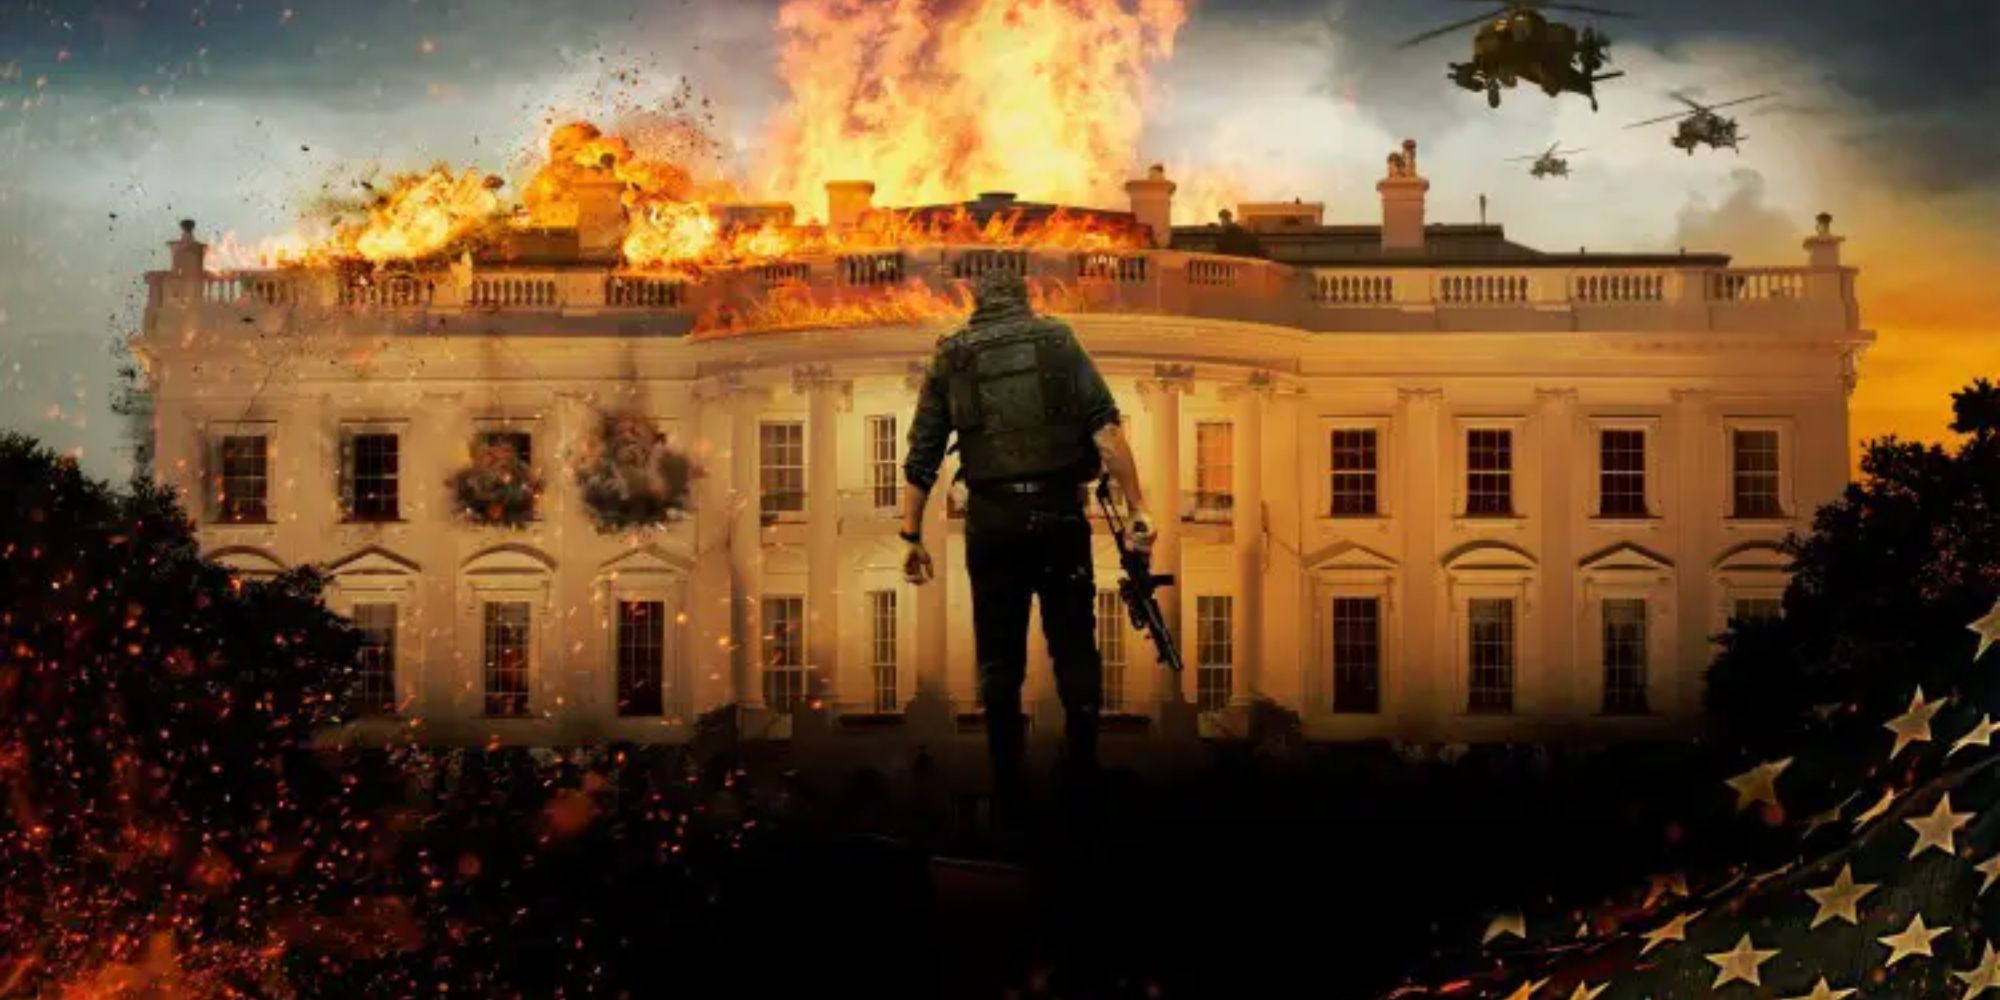 A man stands in front of the burning White House in Olympus Has Fallen.